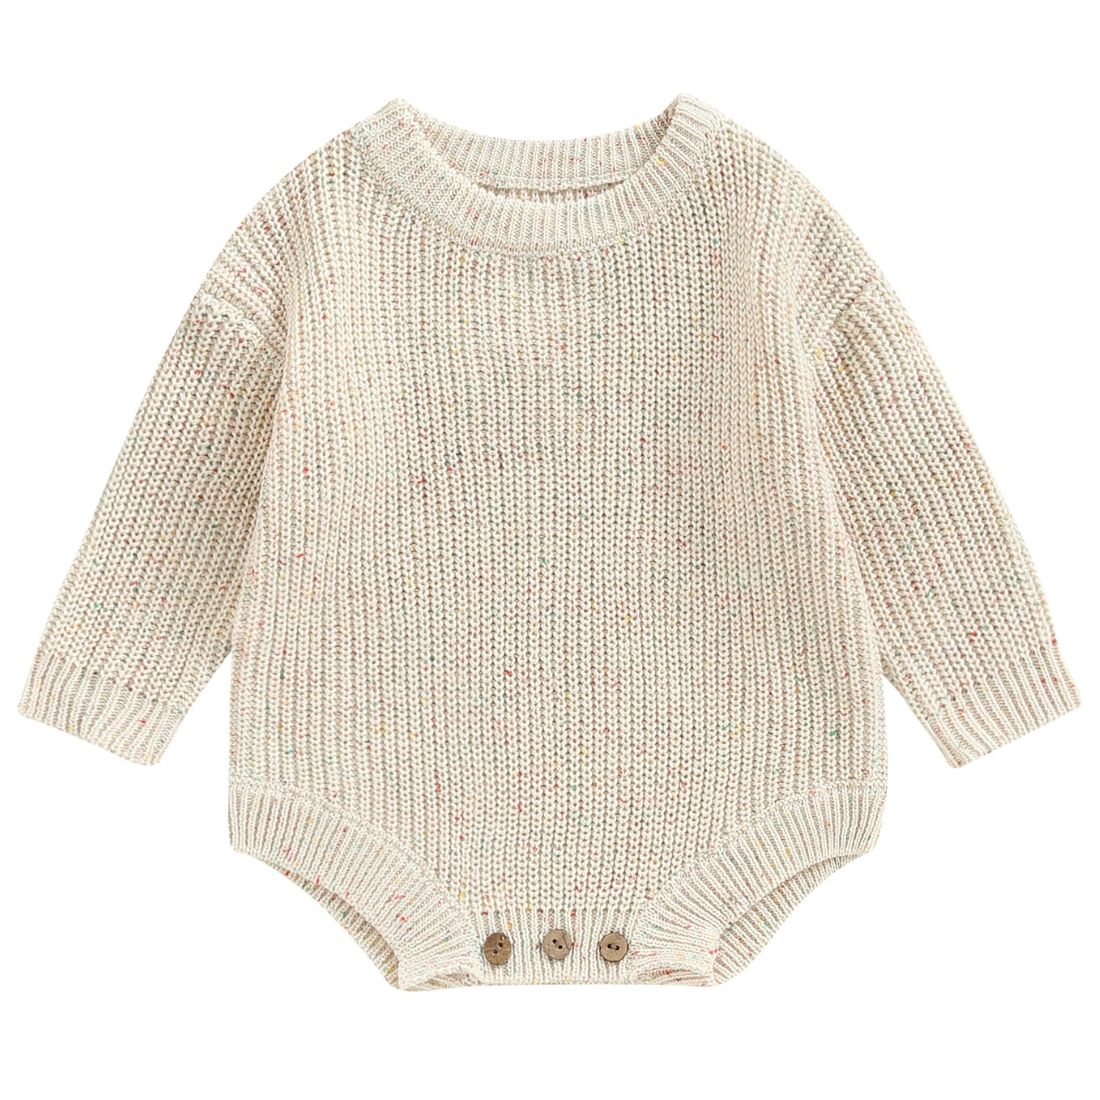 Speckled Knit Baby Boy Romper